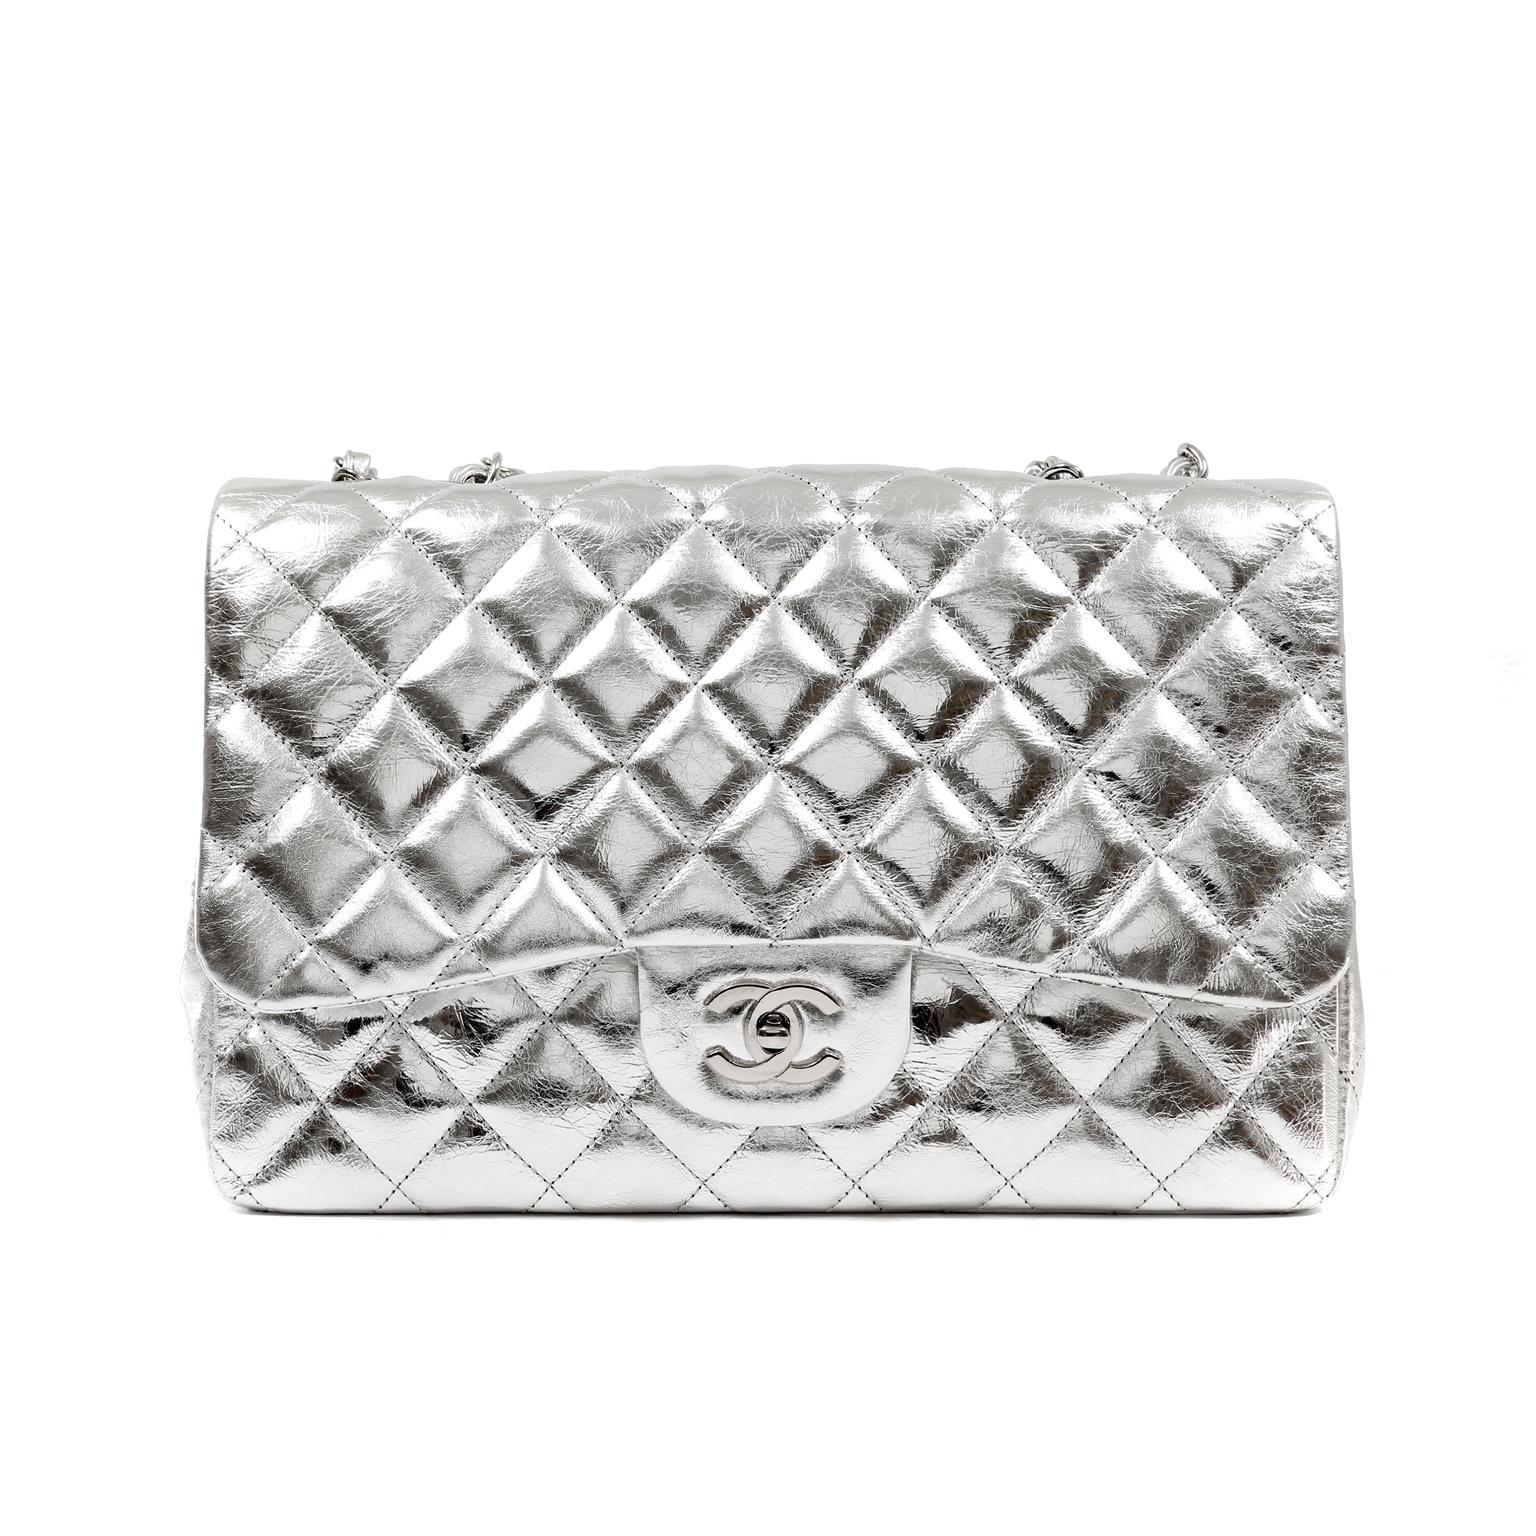 Chanel Silver Foil  Leather Jumbo Classic Flap Bag 1